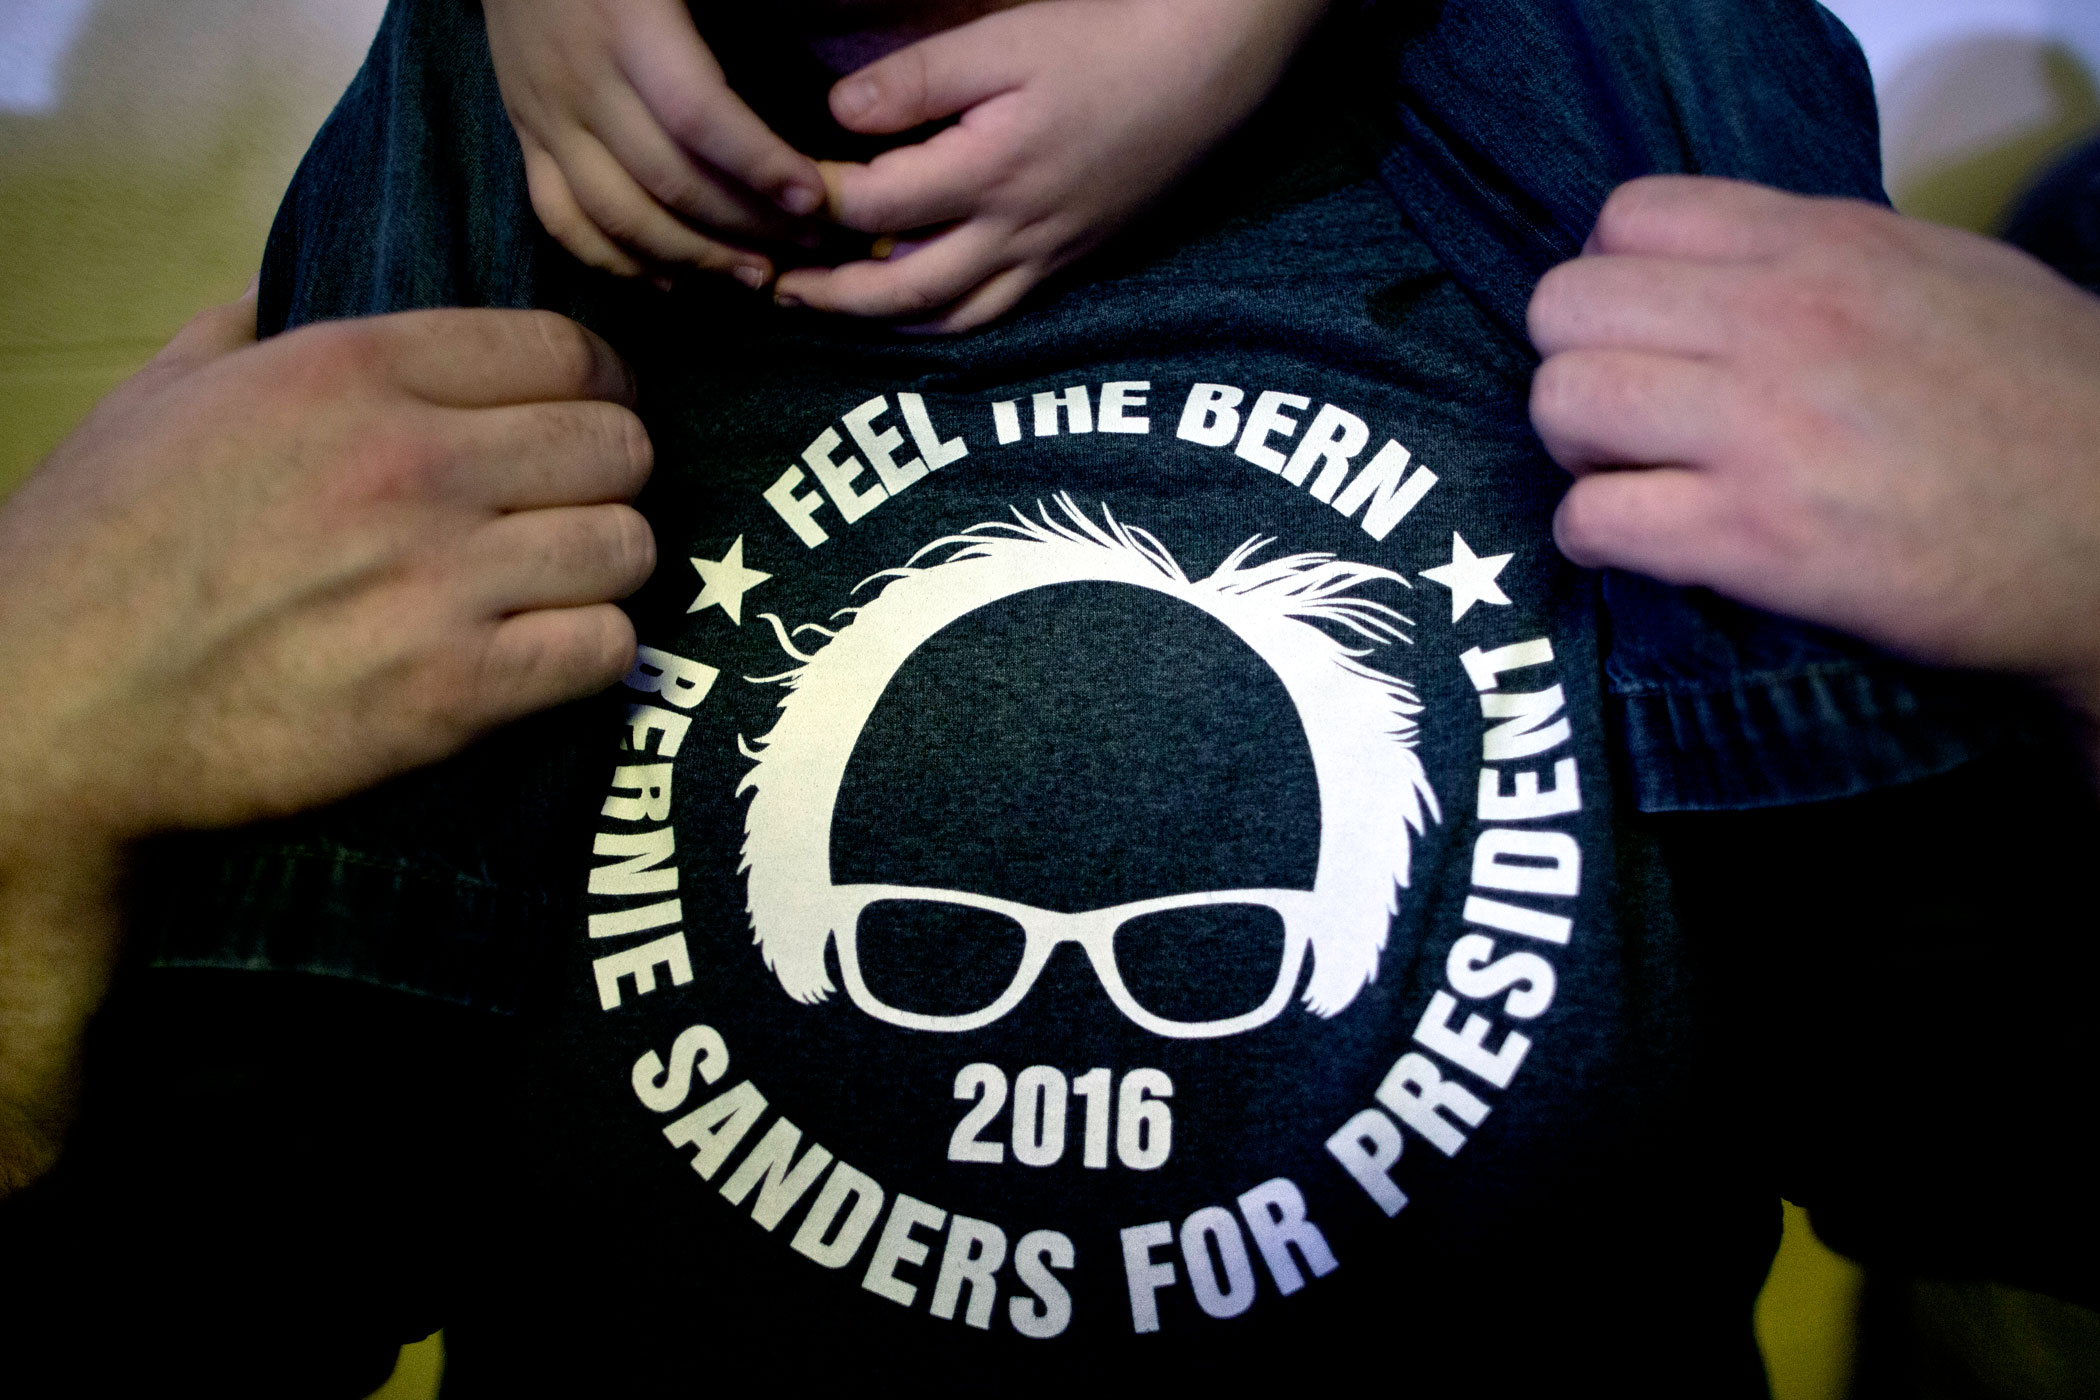 A man wears a shirt supporting Sen. Bernie Sanders, I-Vt., at a campaign event on Jan. in Clinton, Iowa.